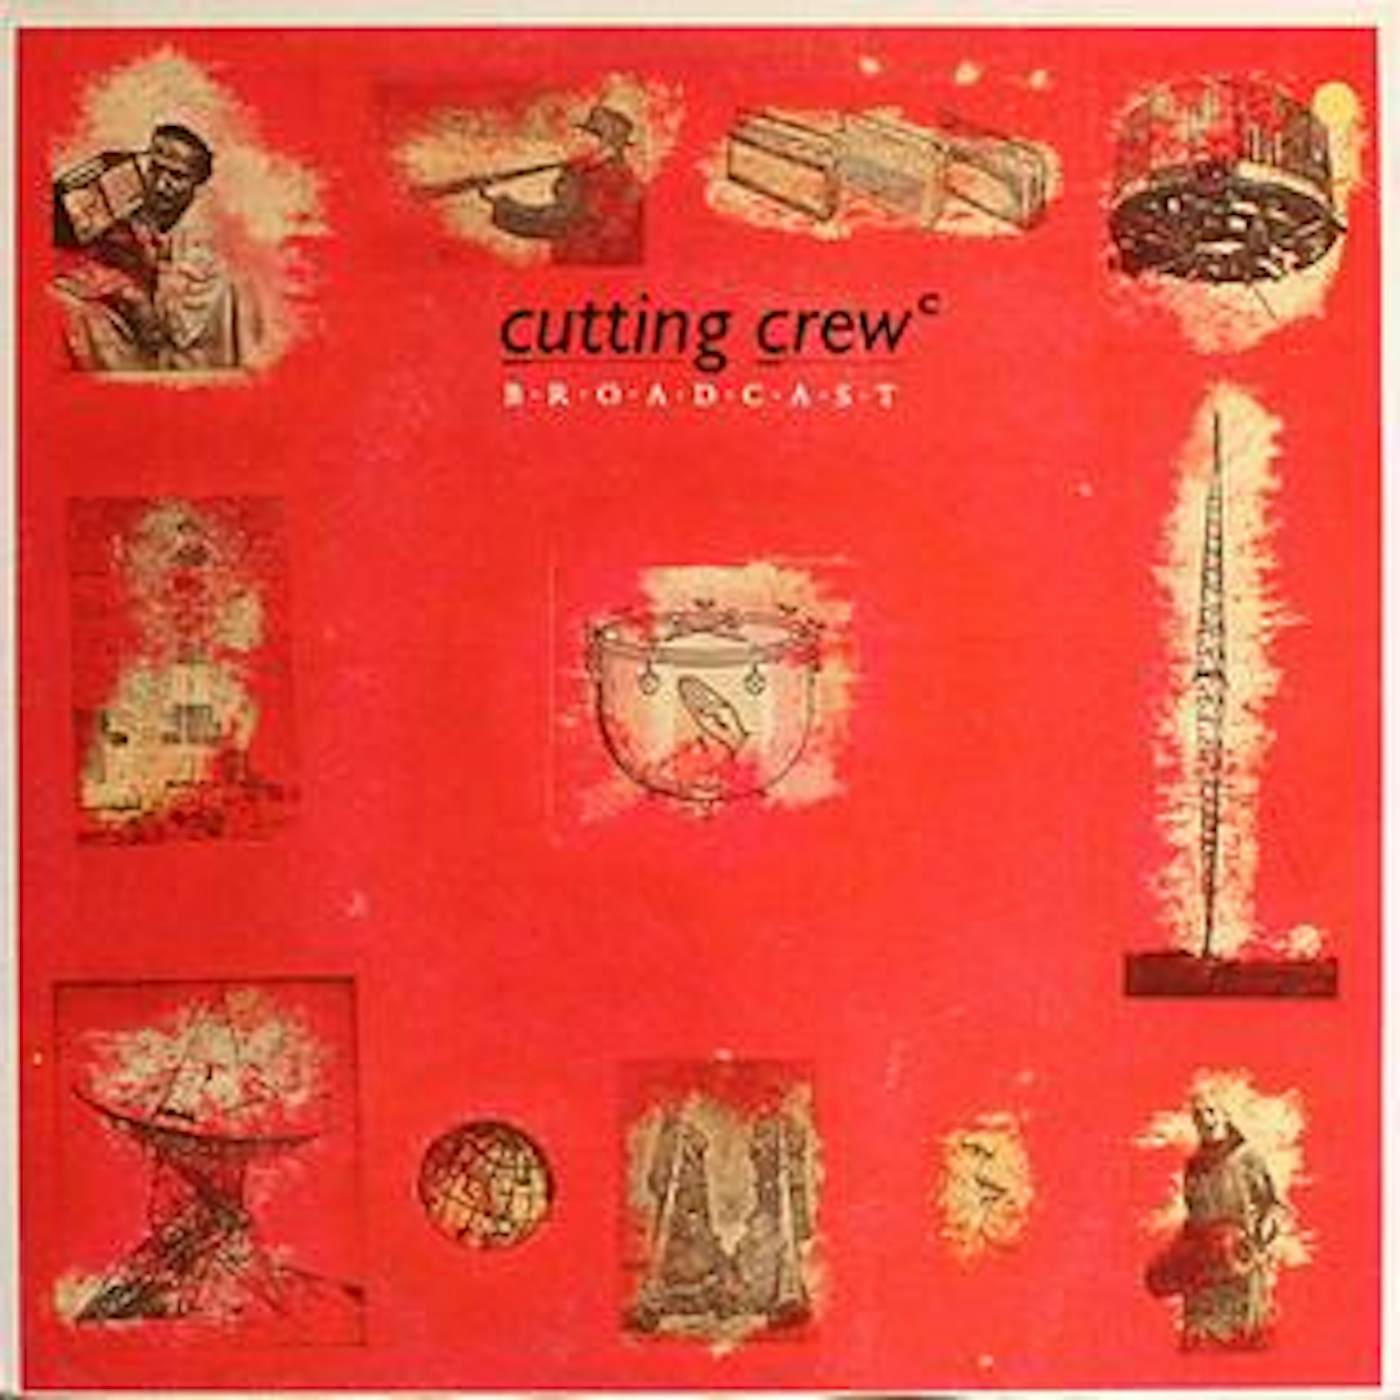 Cutting Crew BROADCAST (I JUST DIED IN YOUR ARMS) Vinyl Record